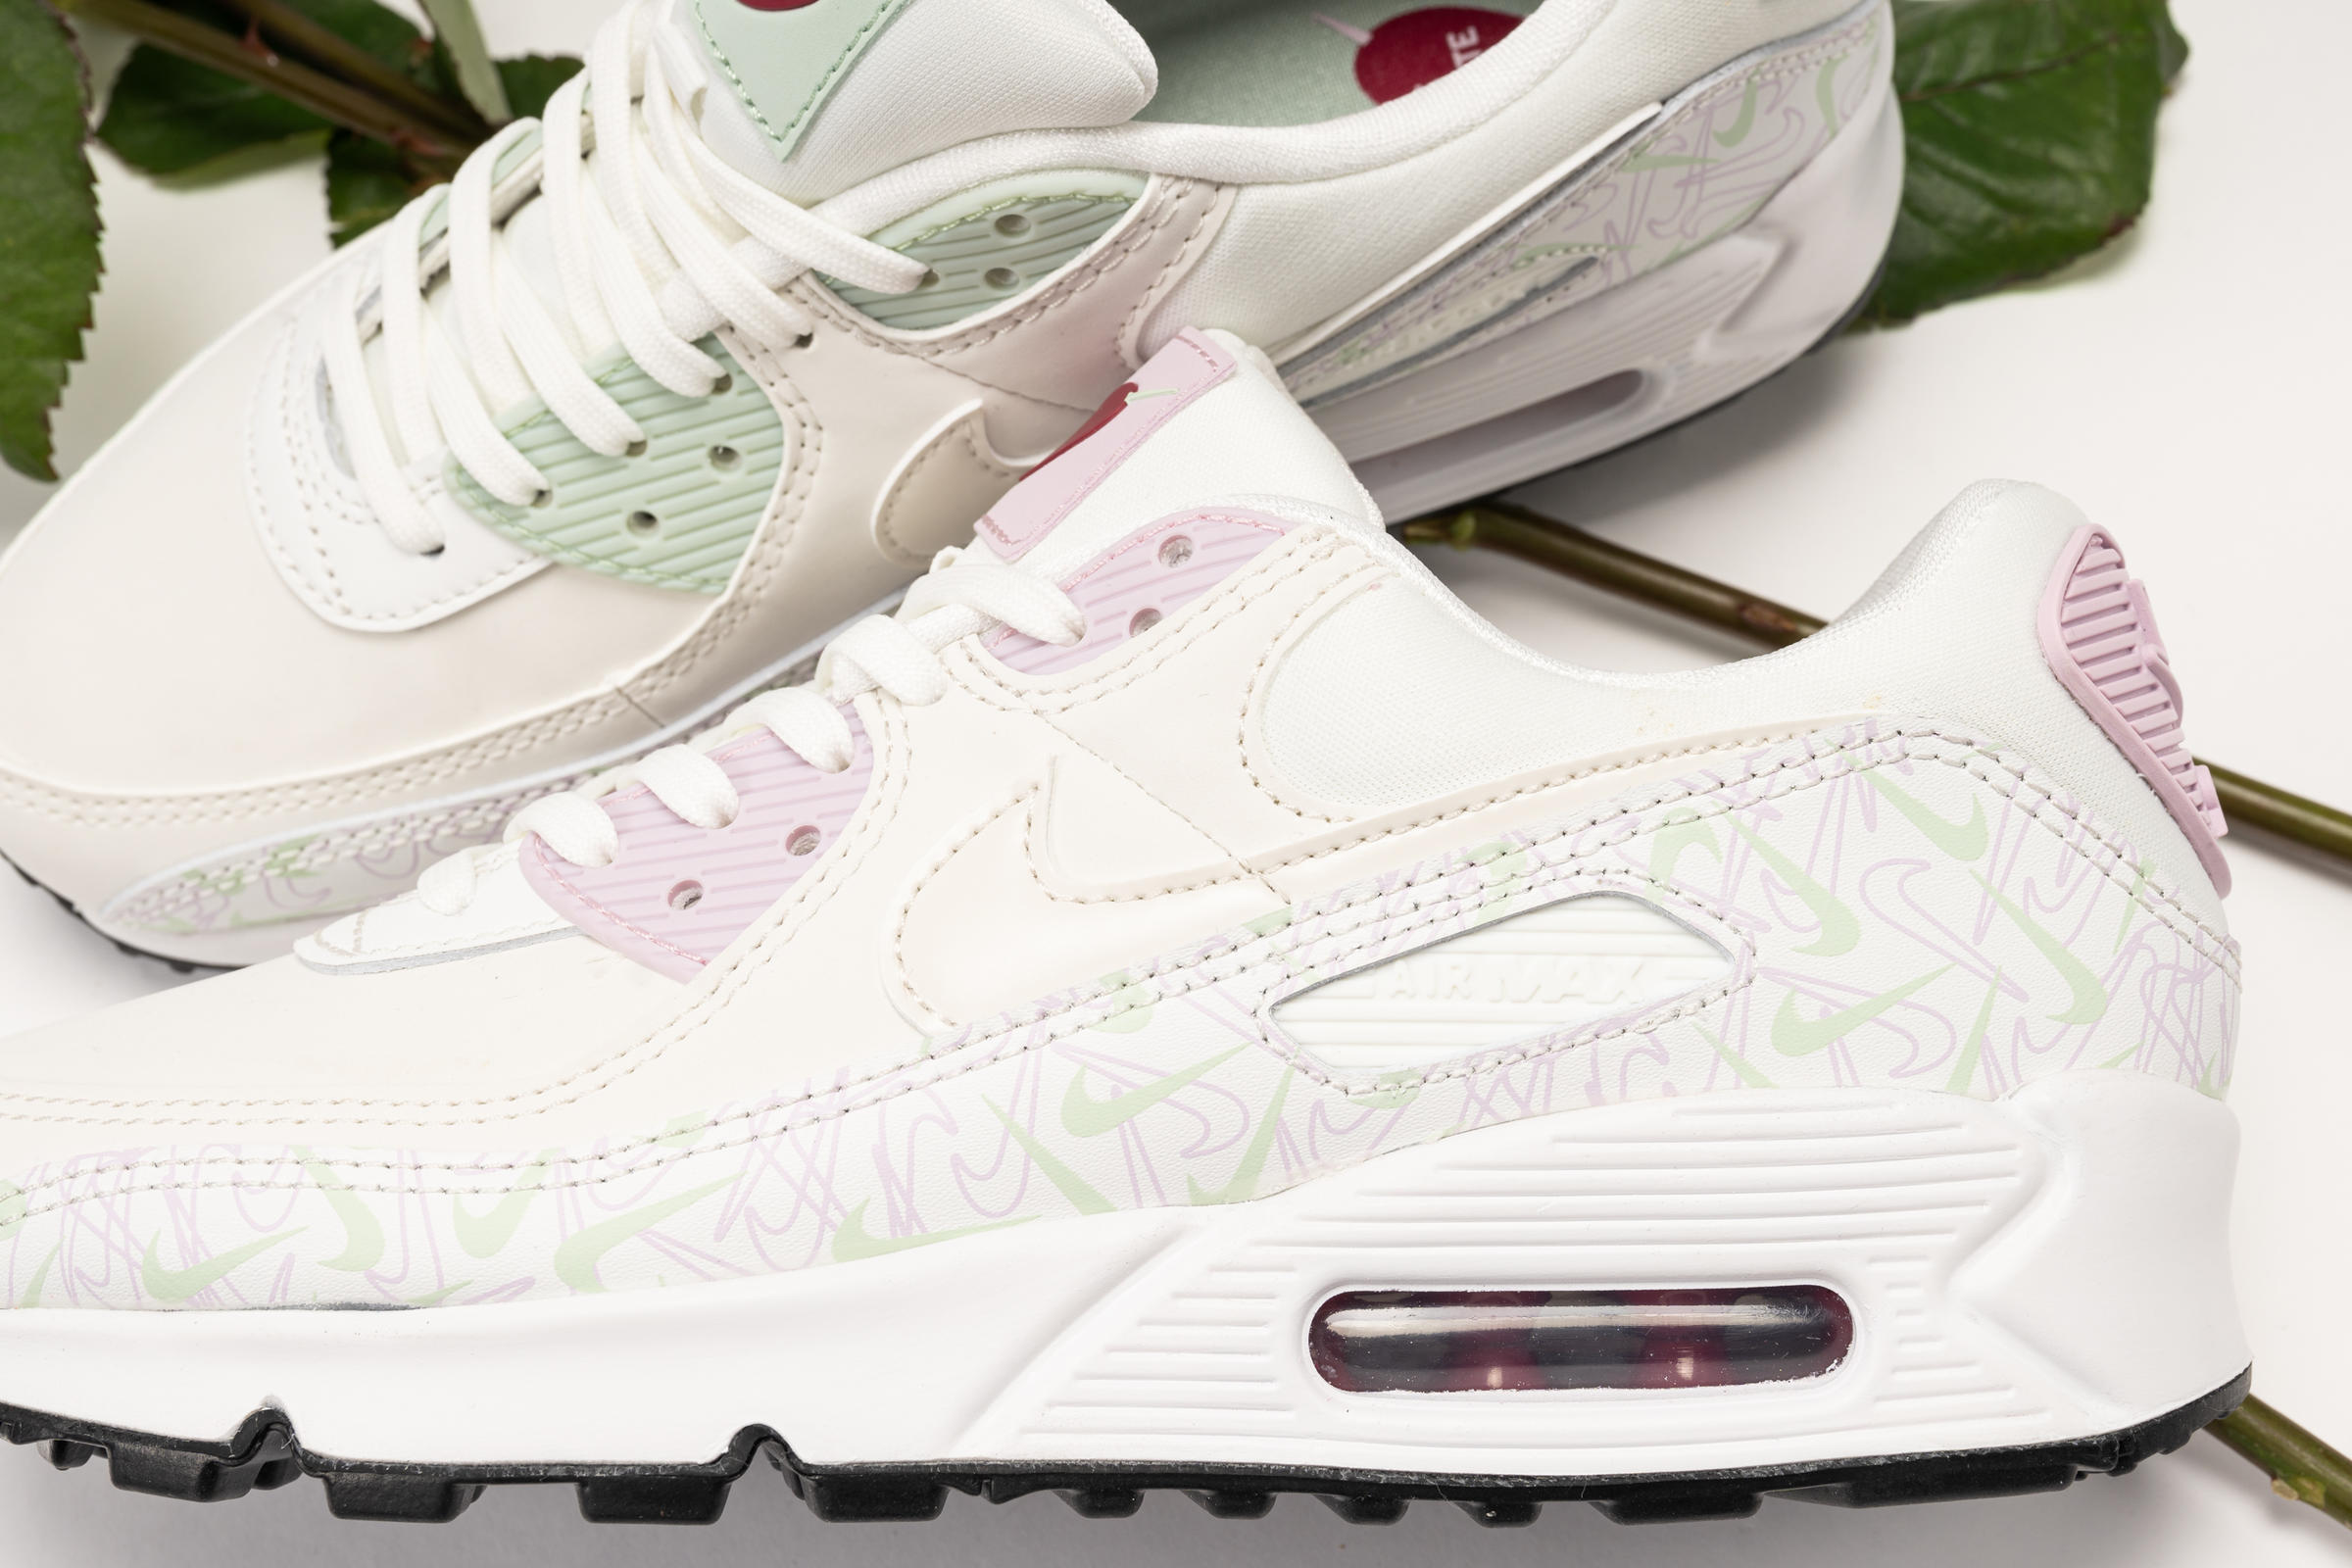 Nike WMNS AIR MAX 90  "Valentine's Day"